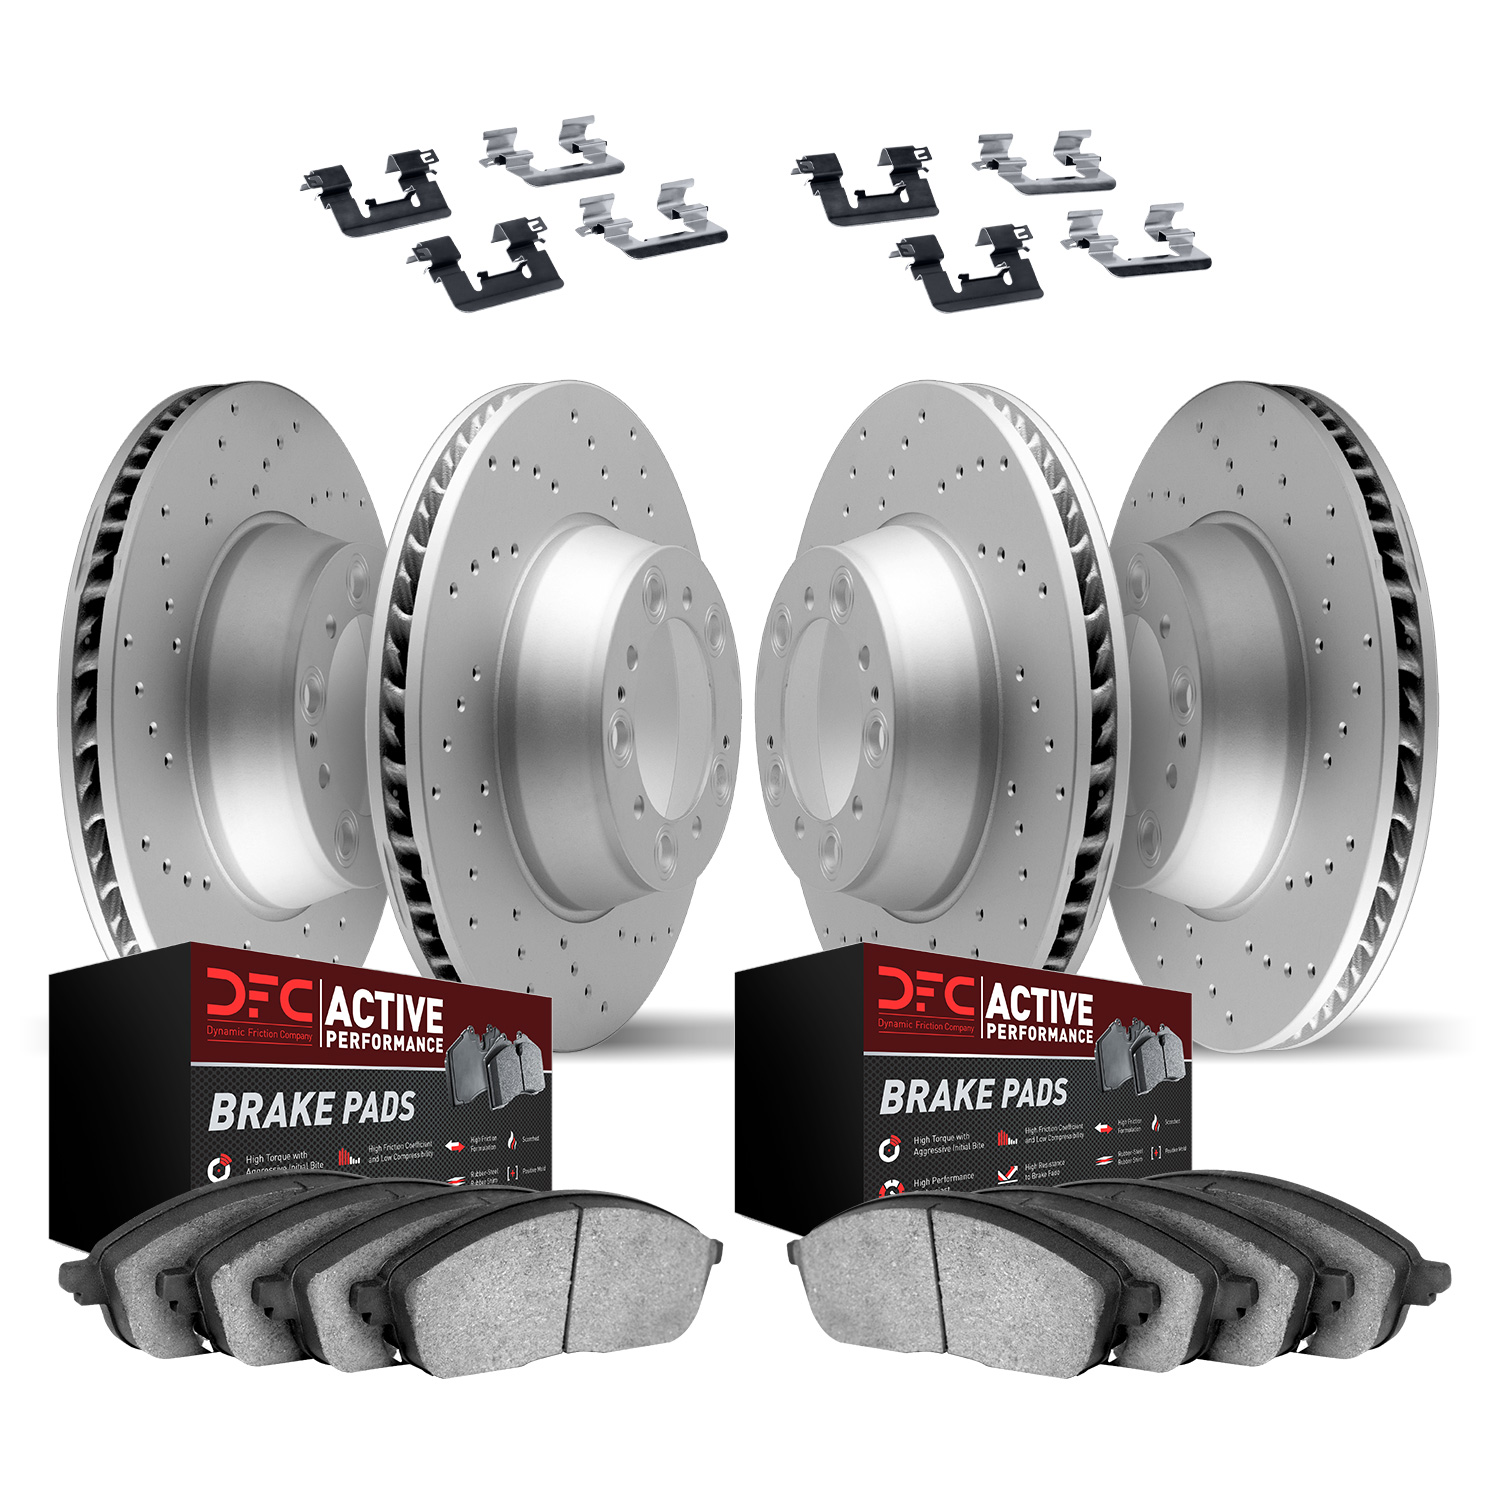 2714-13075 Geoperformance Drilled Brake Rotors with Active Performance Pads Kit & Hardware, Fits Select Multiple Makes/Models, P